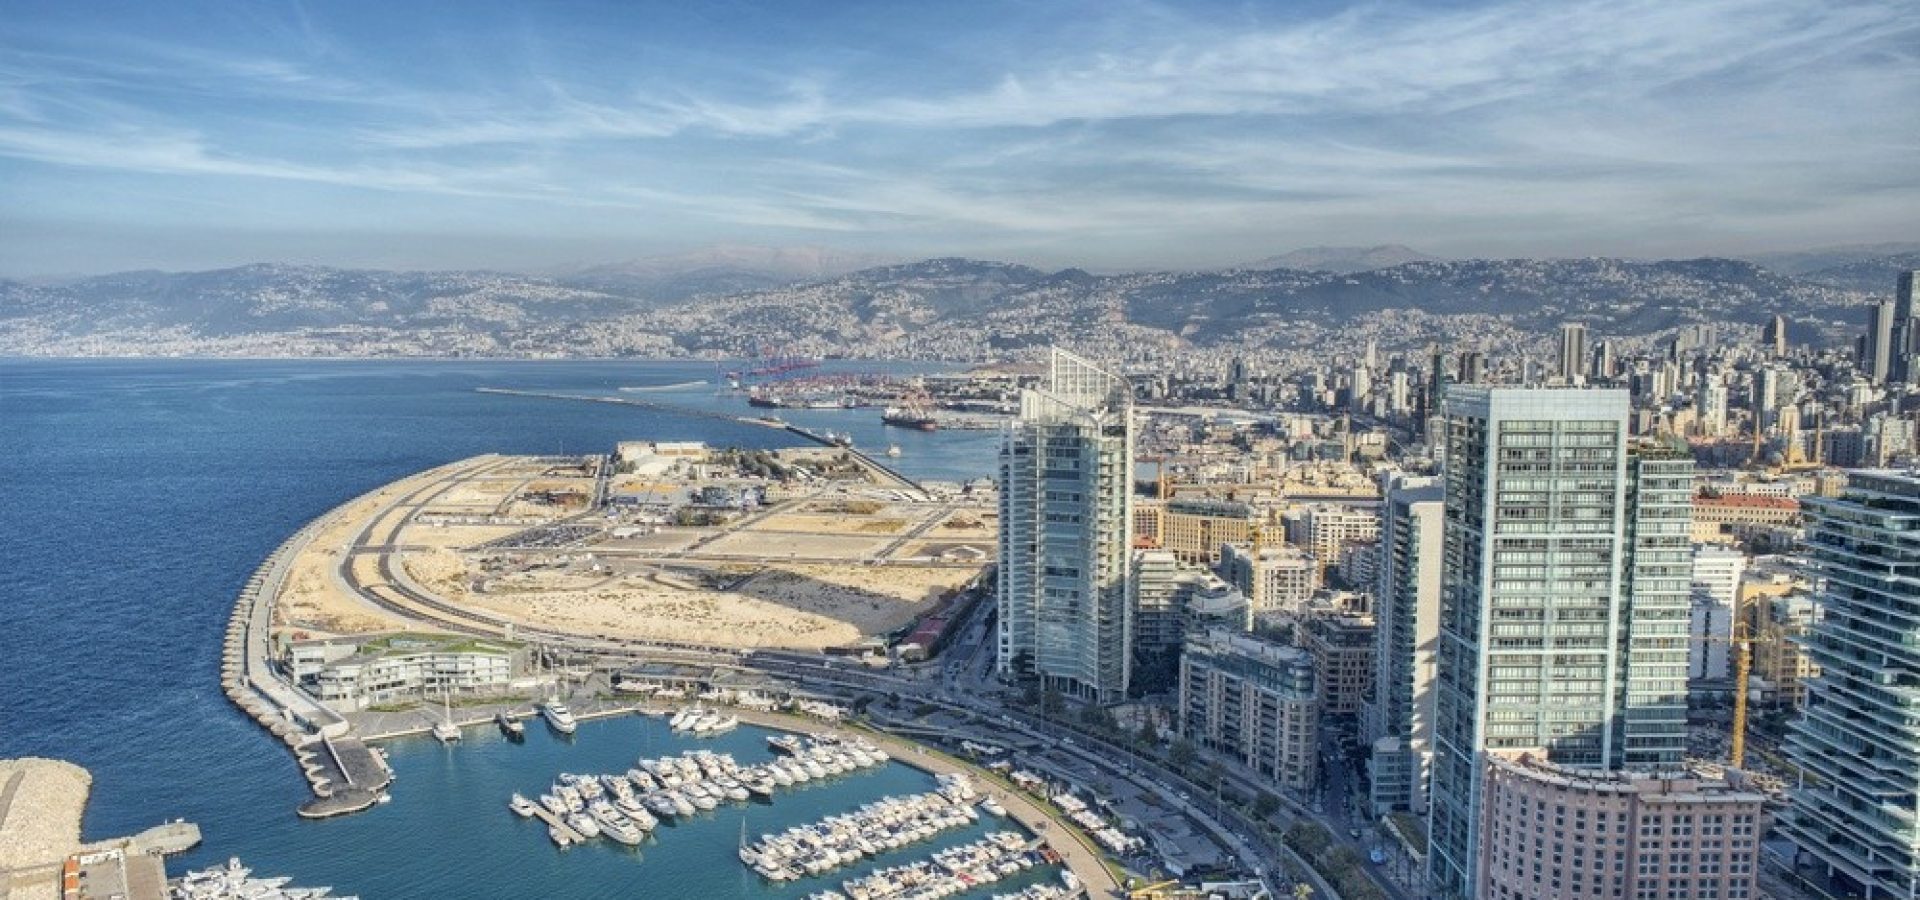 Wibest – Lebanese: An aerial view of Beirut, Lebanon.